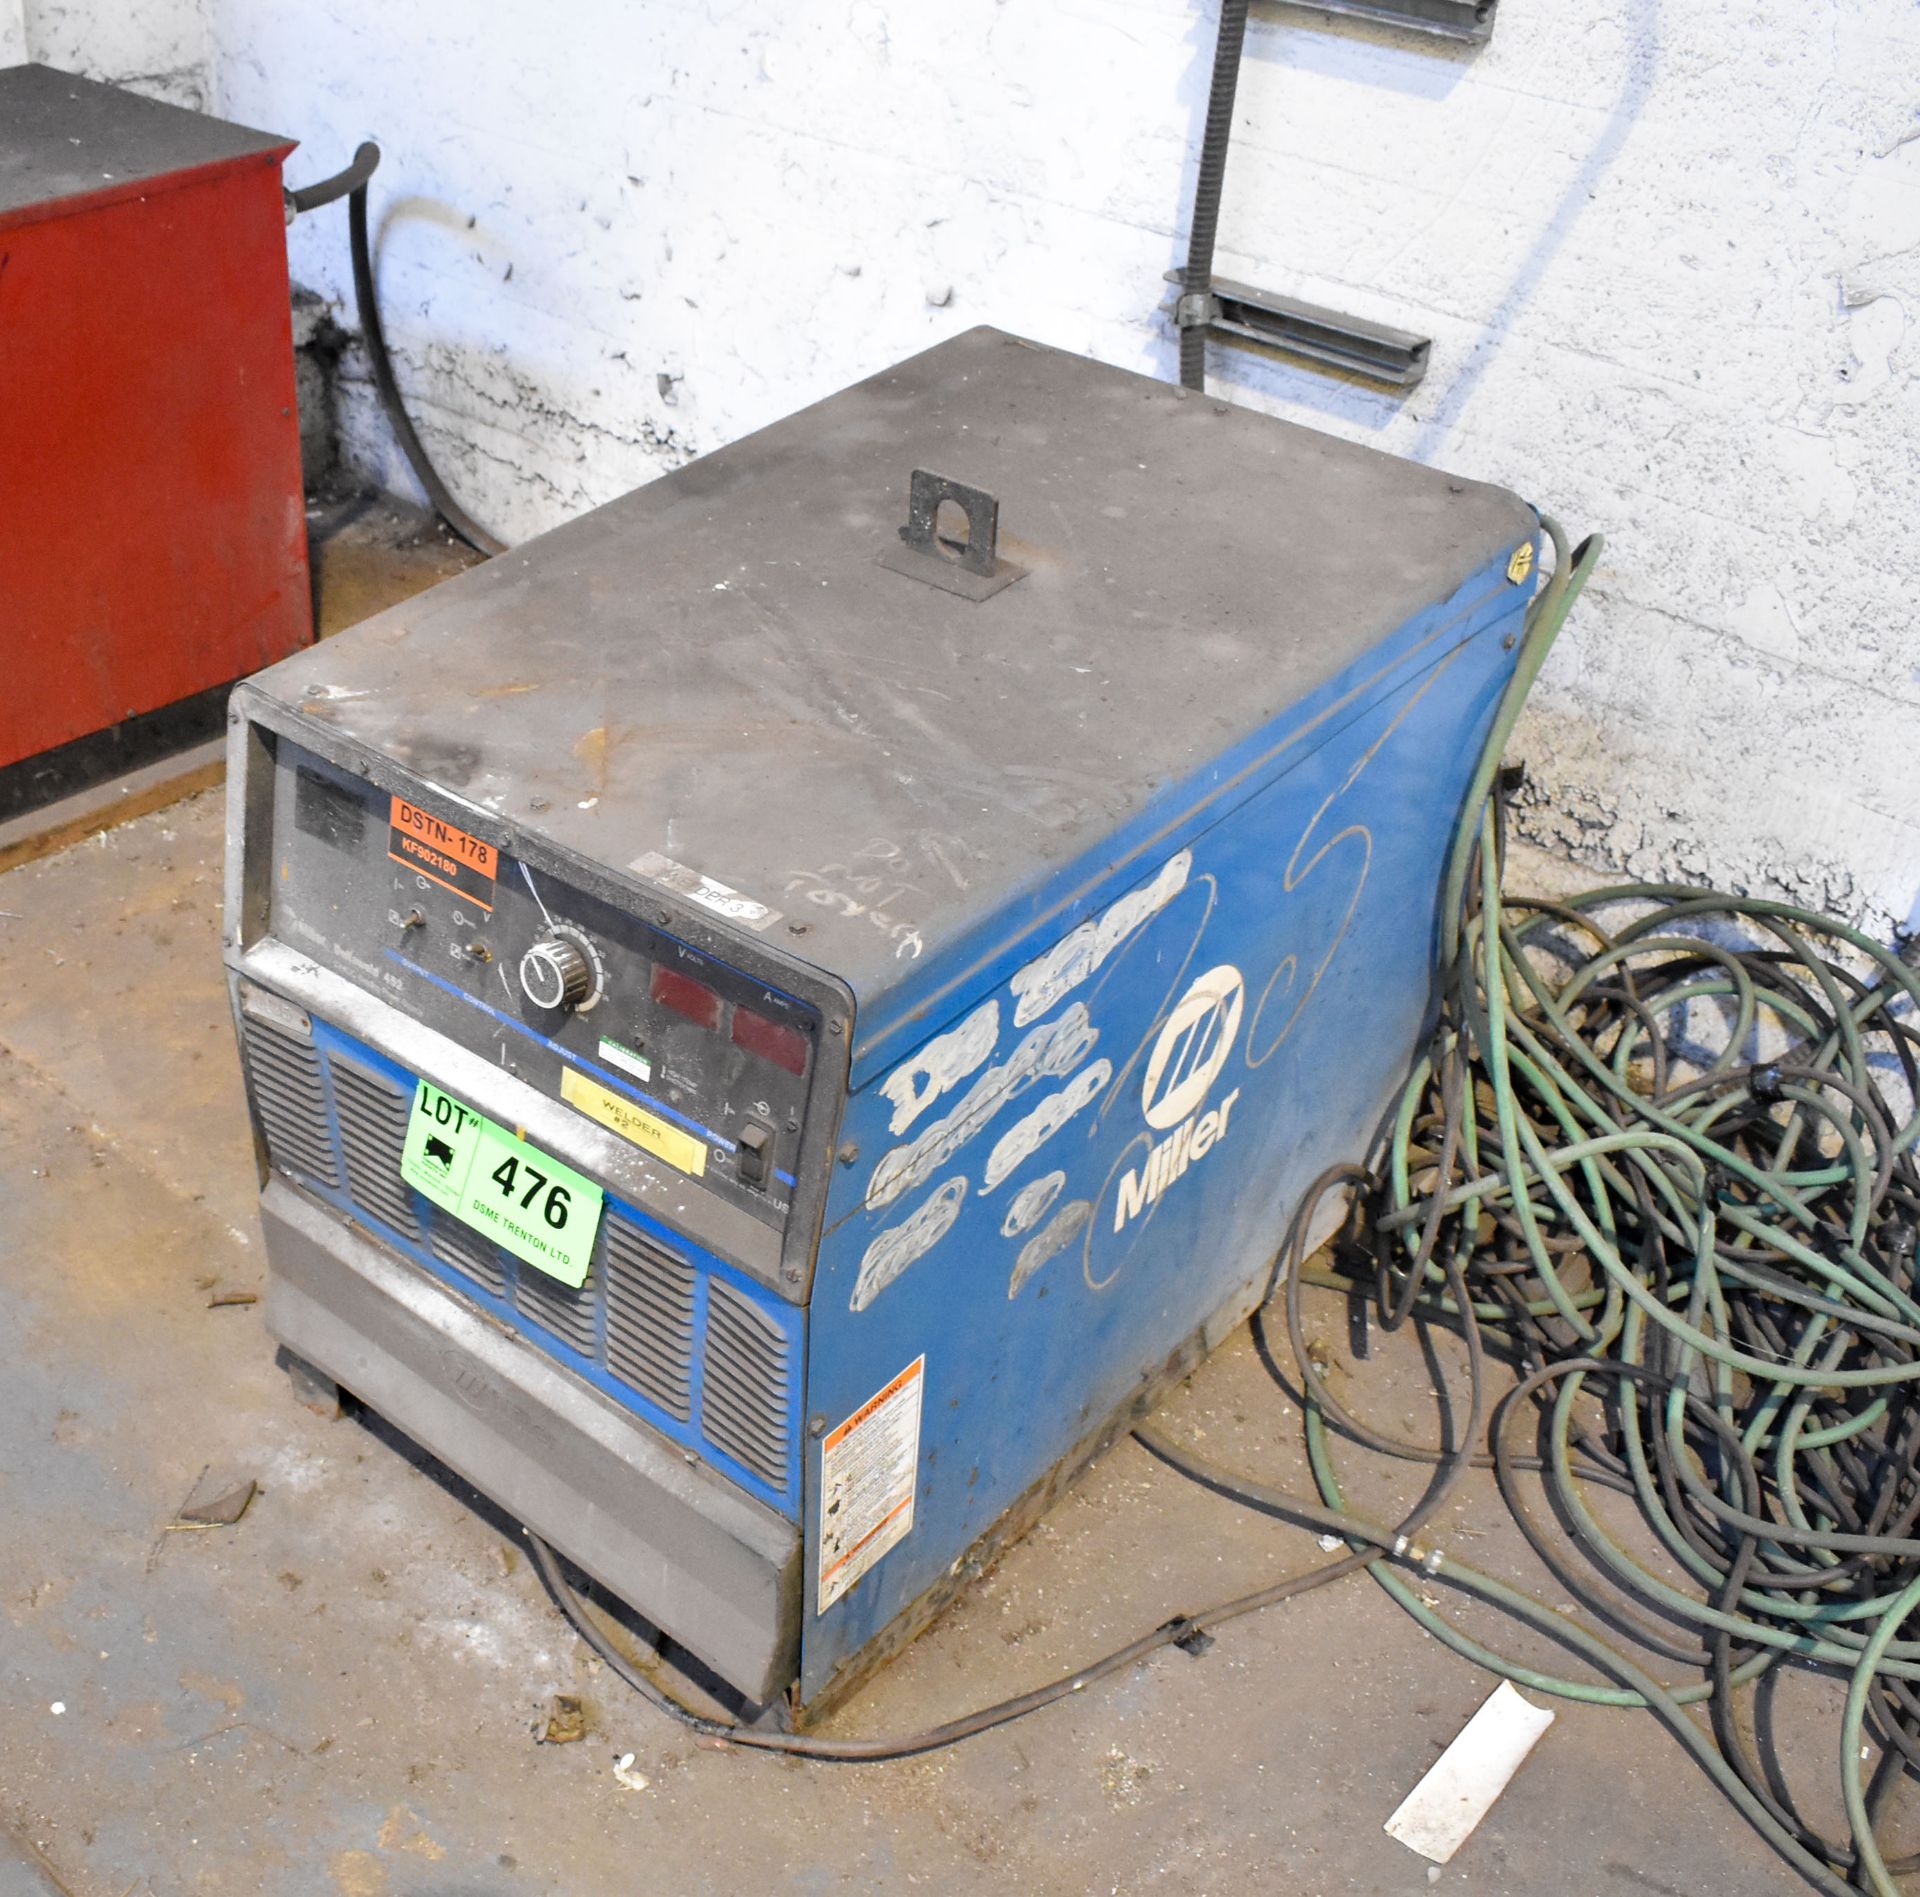 MILLER DELTAWELD 452 WELDING POWER SOURCE (CI) [RIGGING FEE FOR LOT# 476 - $40 USD +PLUS TAXES]